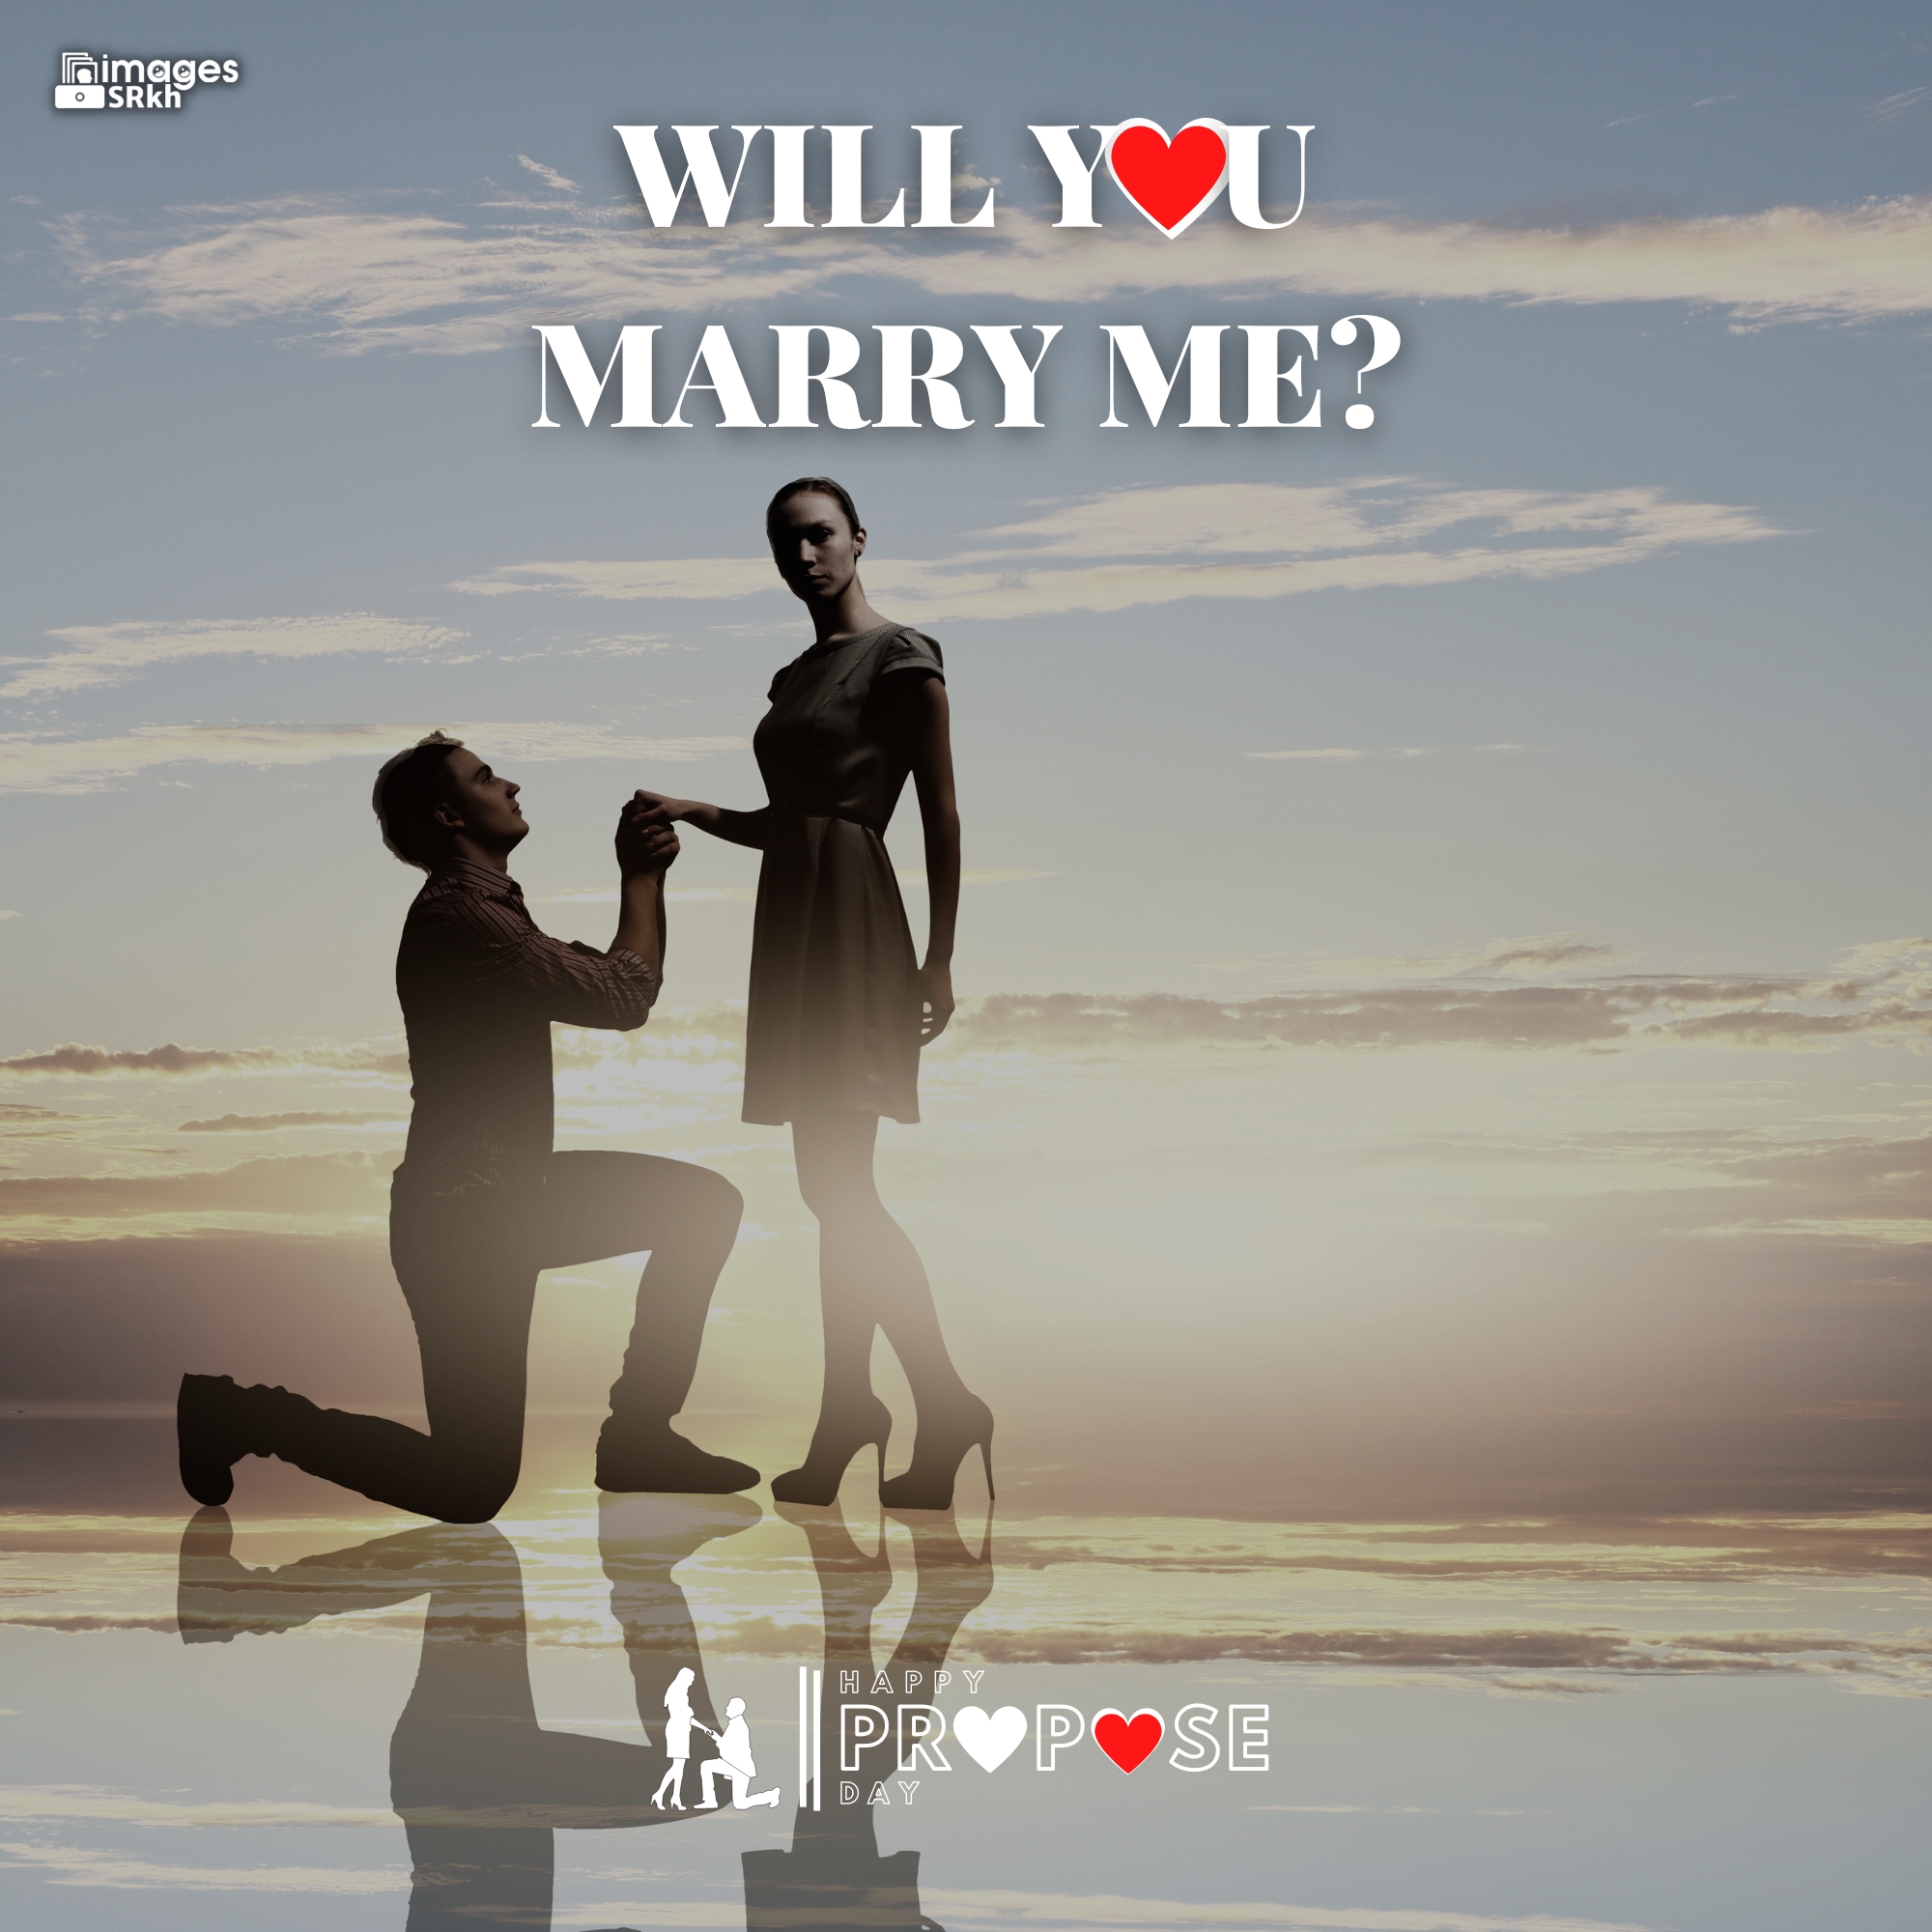 Propose Day Images | 262 | Will You MARRY ME